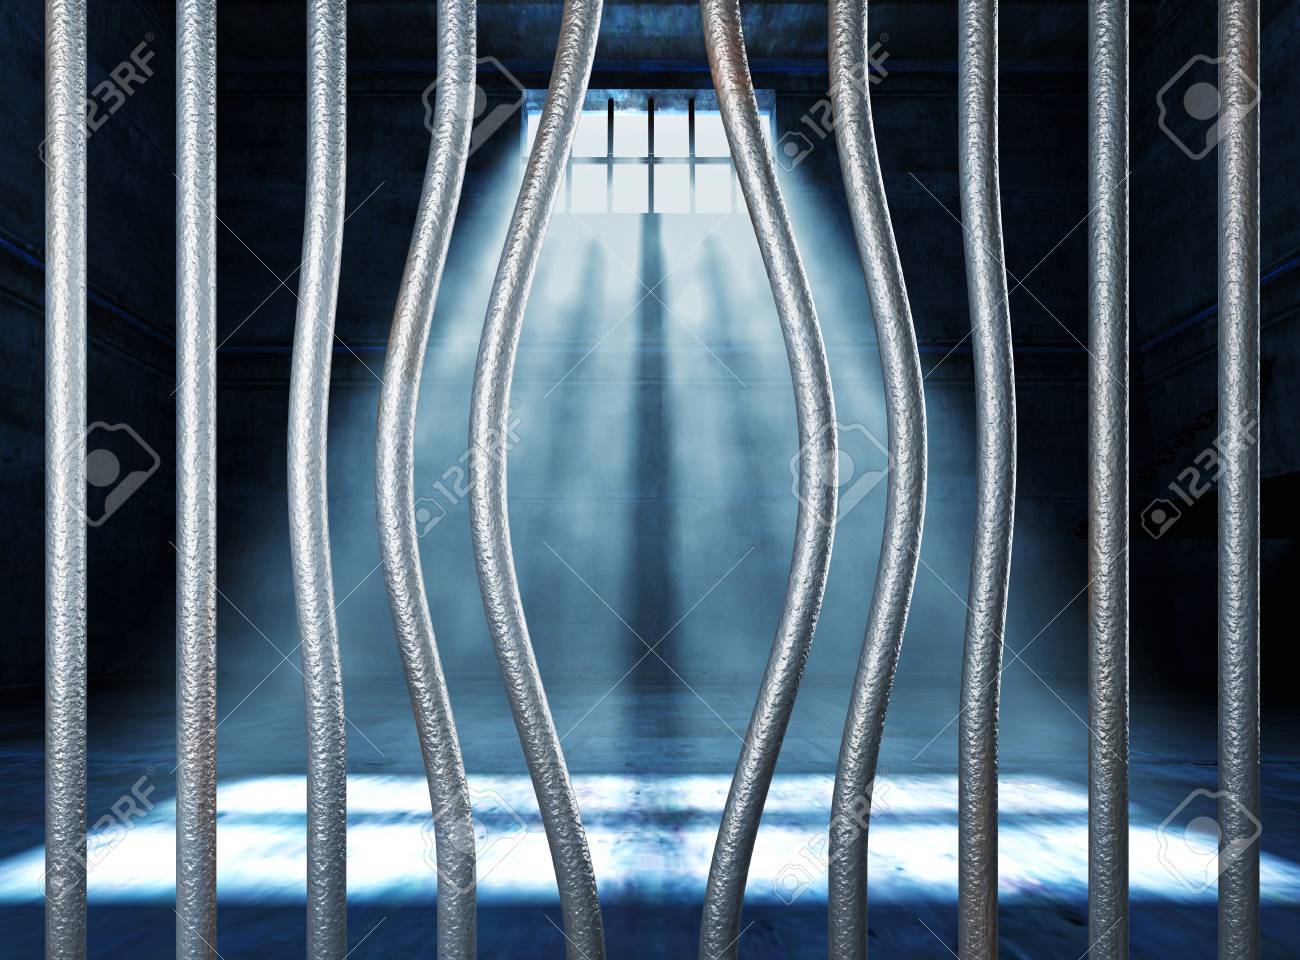 Prison 3d And Bended Metal Bar Background Stock Photo Picture